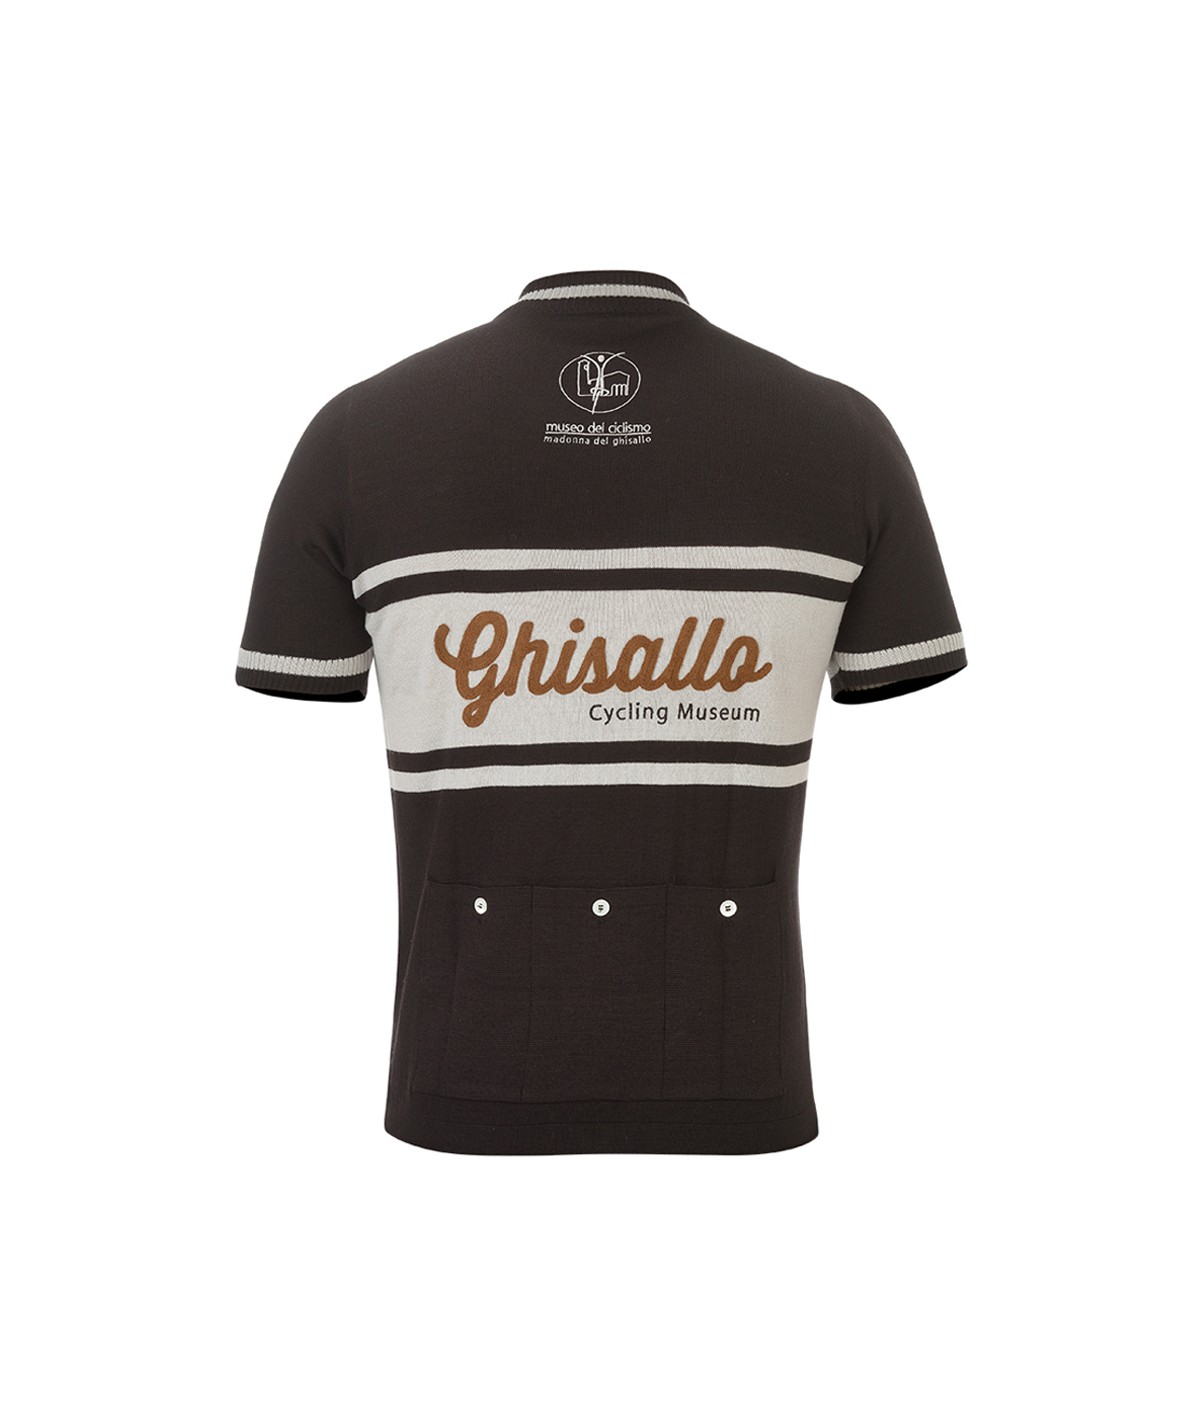 Replica vintage jersey from 1970, Ghisallo logo